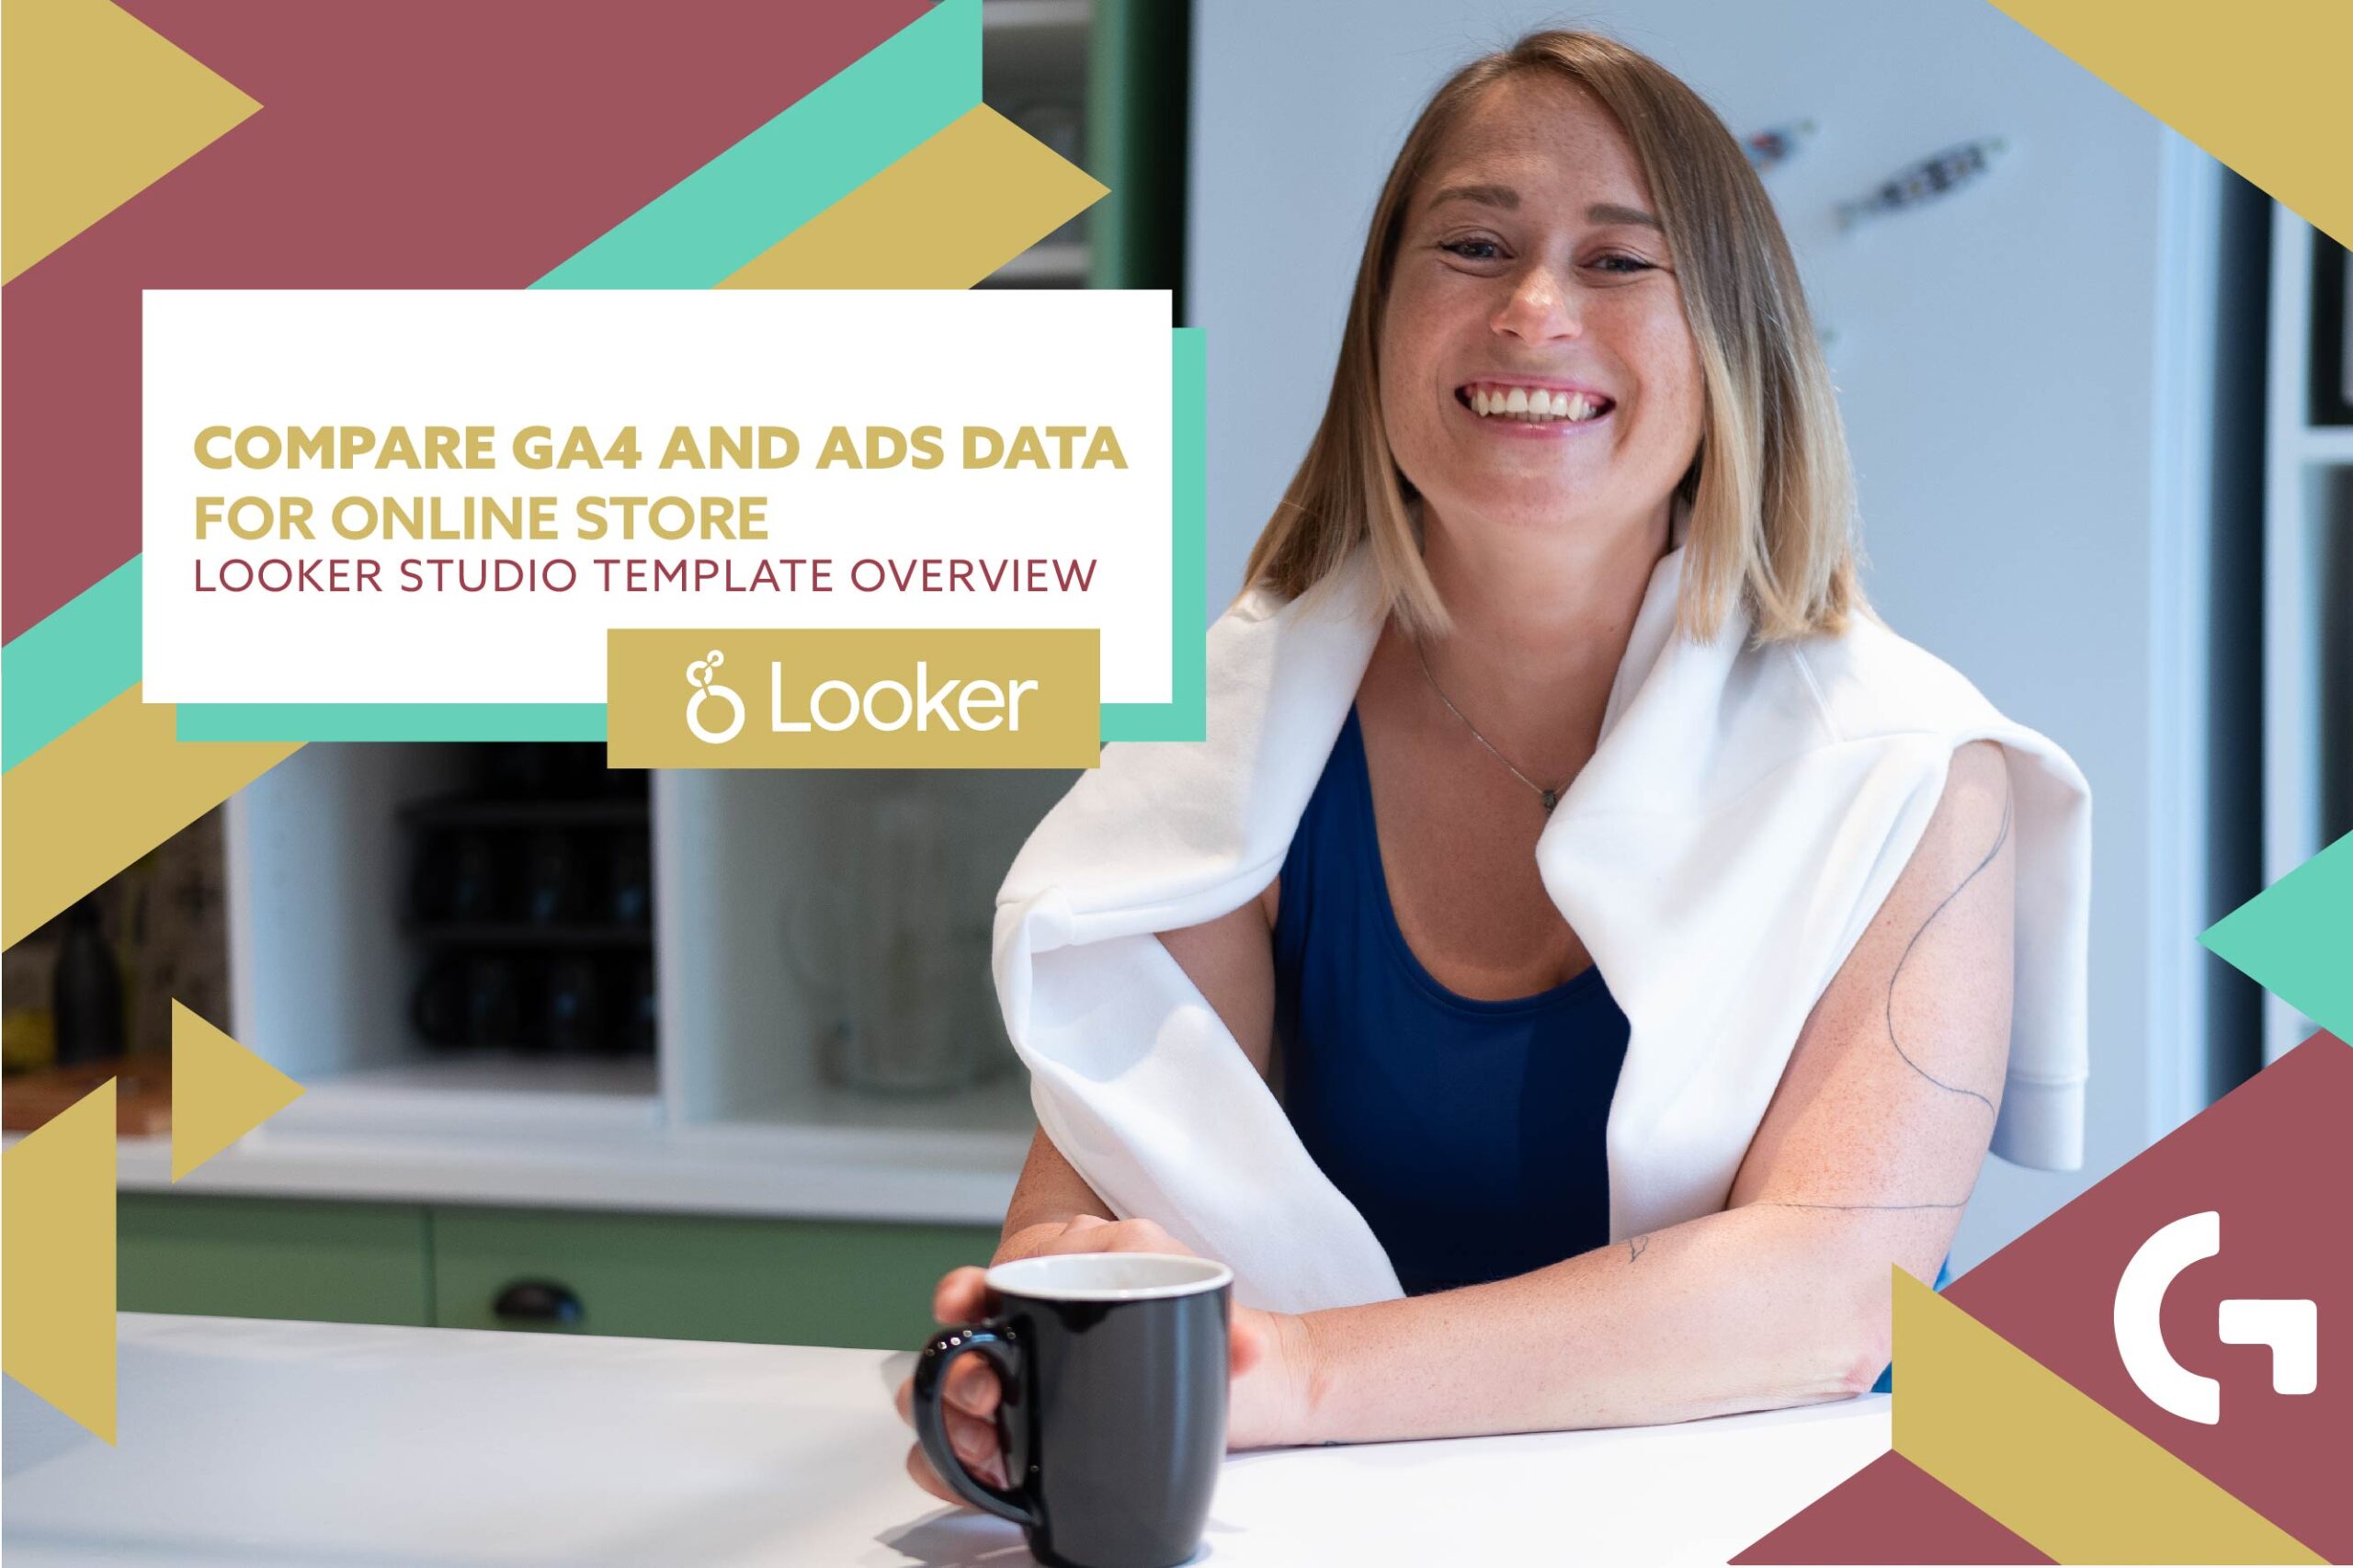 Compare GA4 and Ads data for online store – Looker Studio template overview